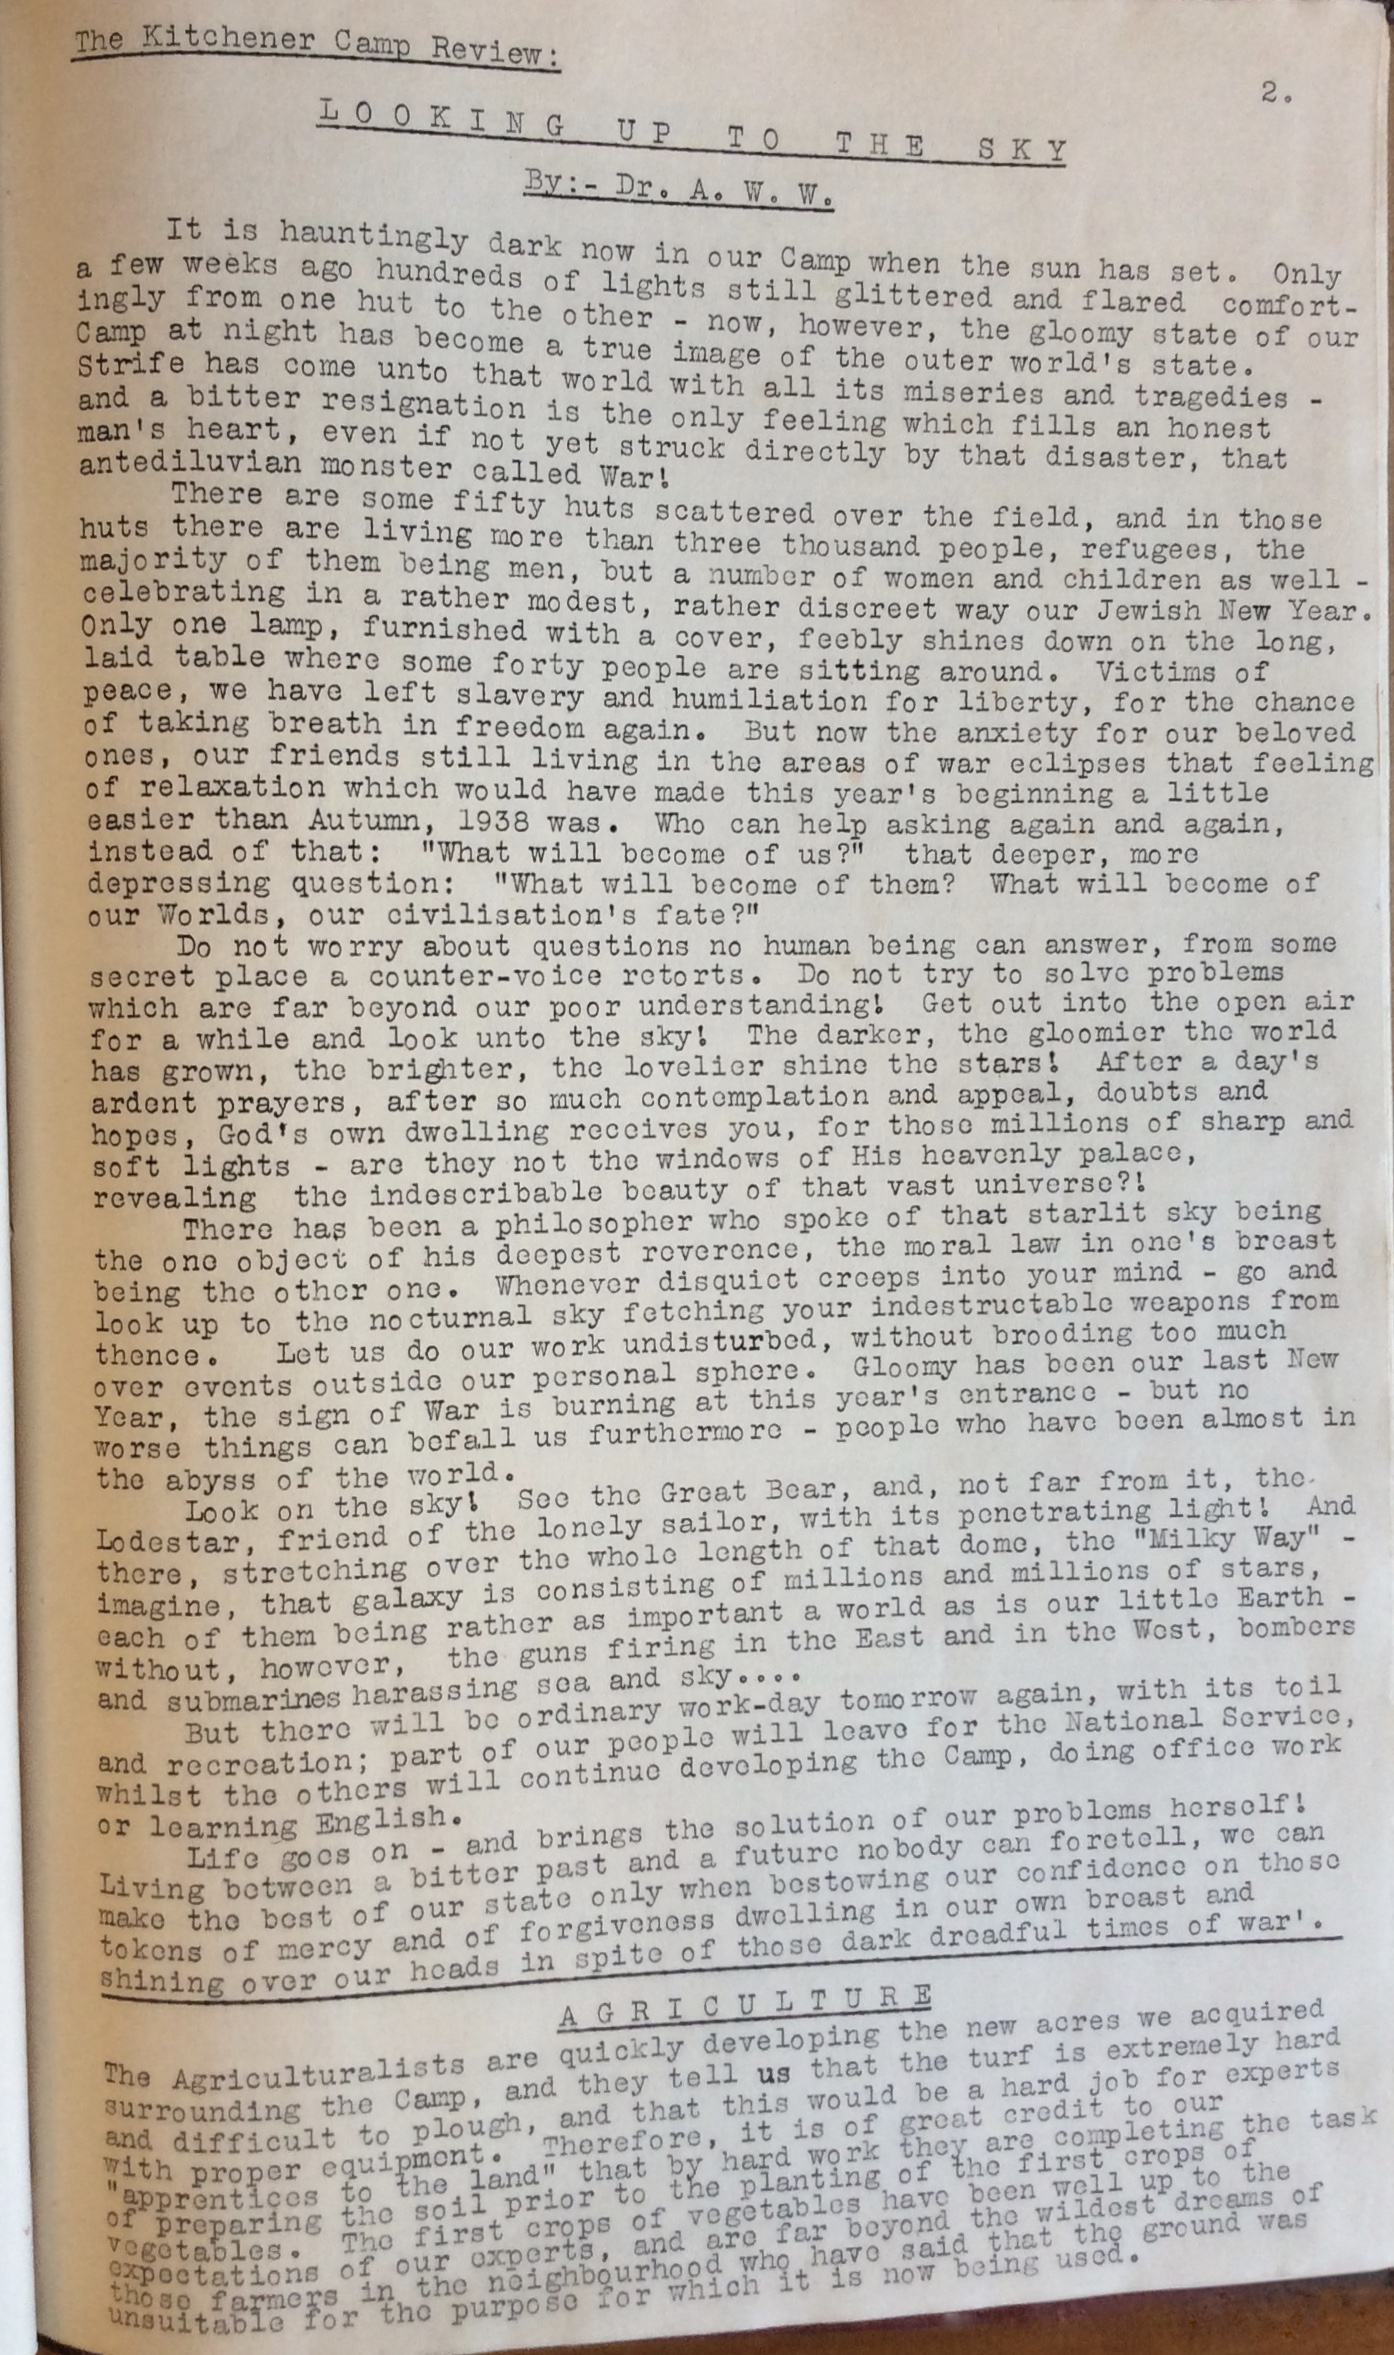 Kitchener Camp Review, October 1939, page 2